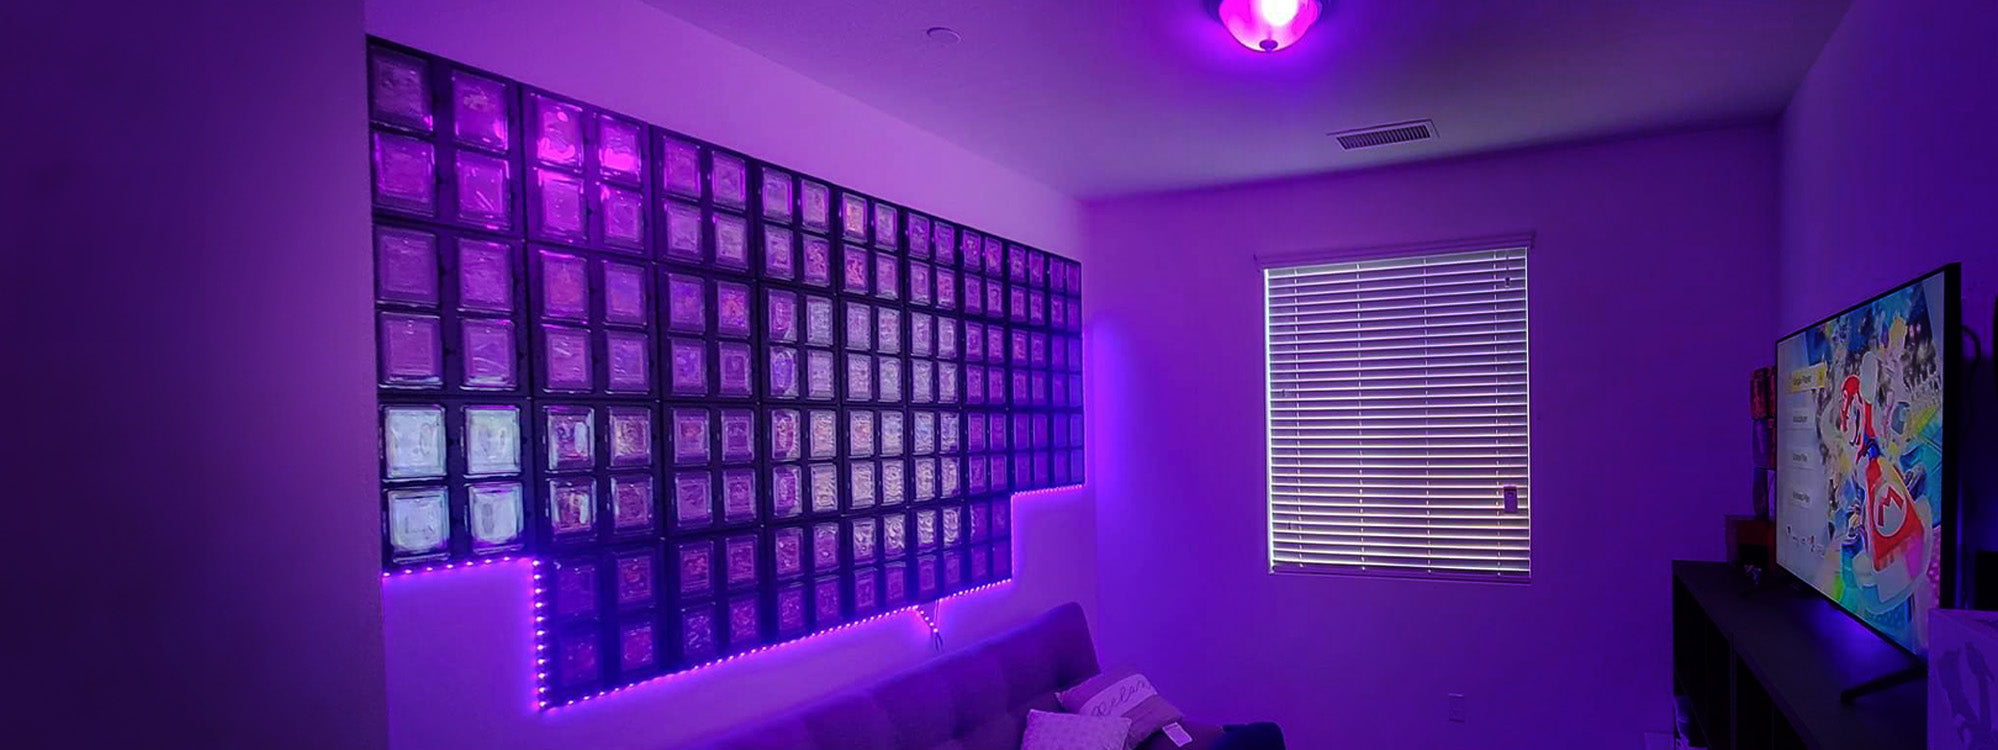 An impressive display of 48 trading cards, meticulously arranged in a grid, showcased prominently in a customer's man cave. The ambient lighting casts a soft glow on the cards, highlighting the vivid colors and intricate details of each one. The surrounding decor gives a cozy yet masculine vibe, creating an inviting atmosphere for enthusiasts and guests alike.